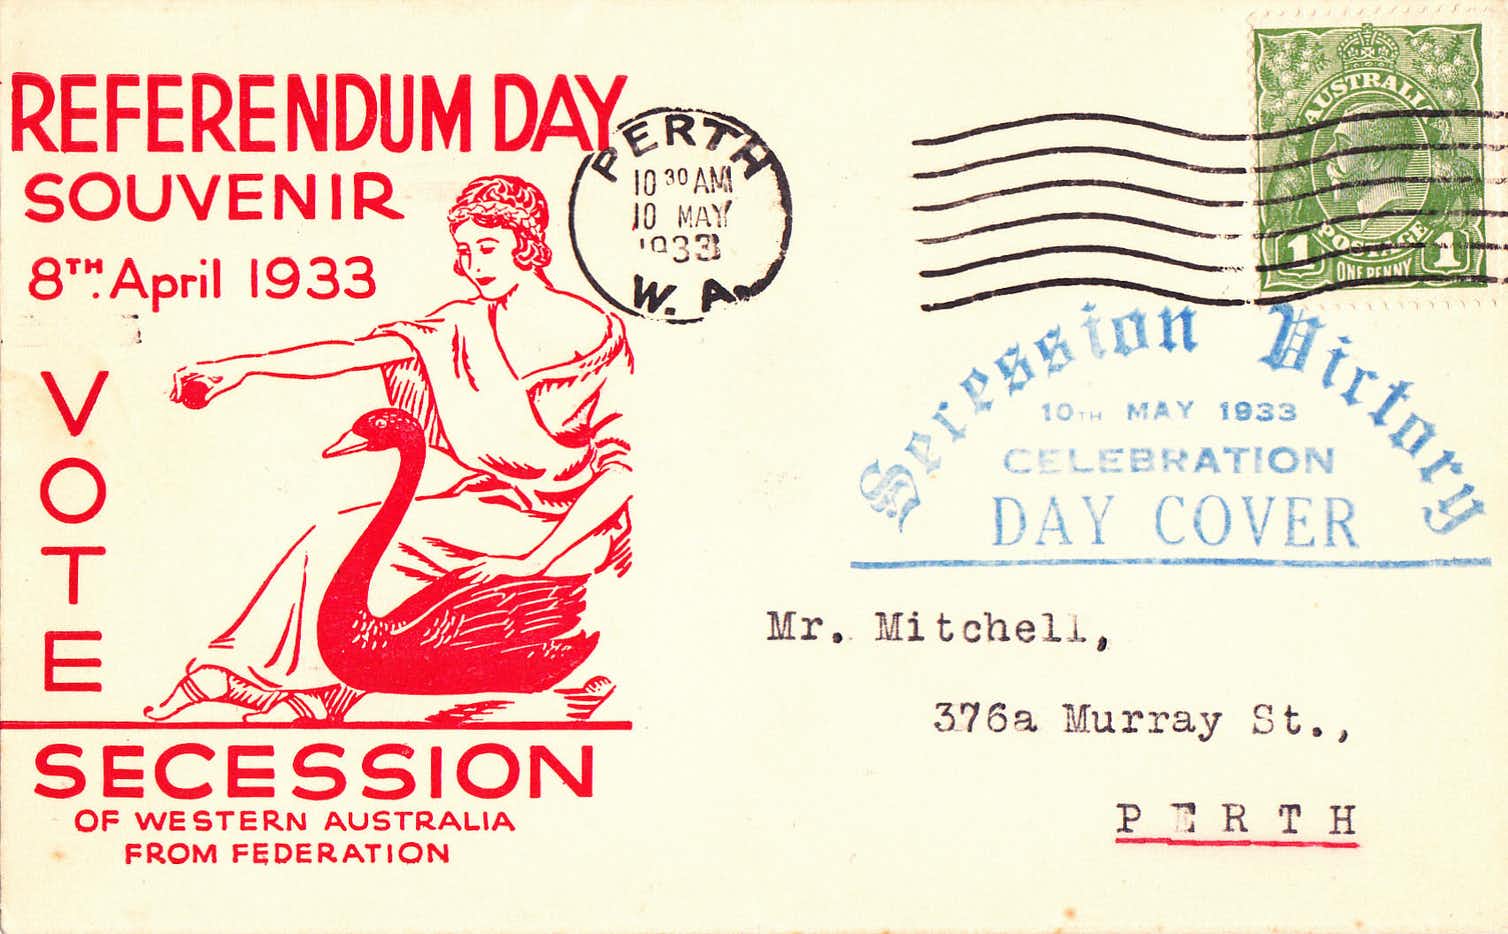 A WA 'Referendum Day' souvenir postcard dated 8th April 1933, coloured in yellow and red